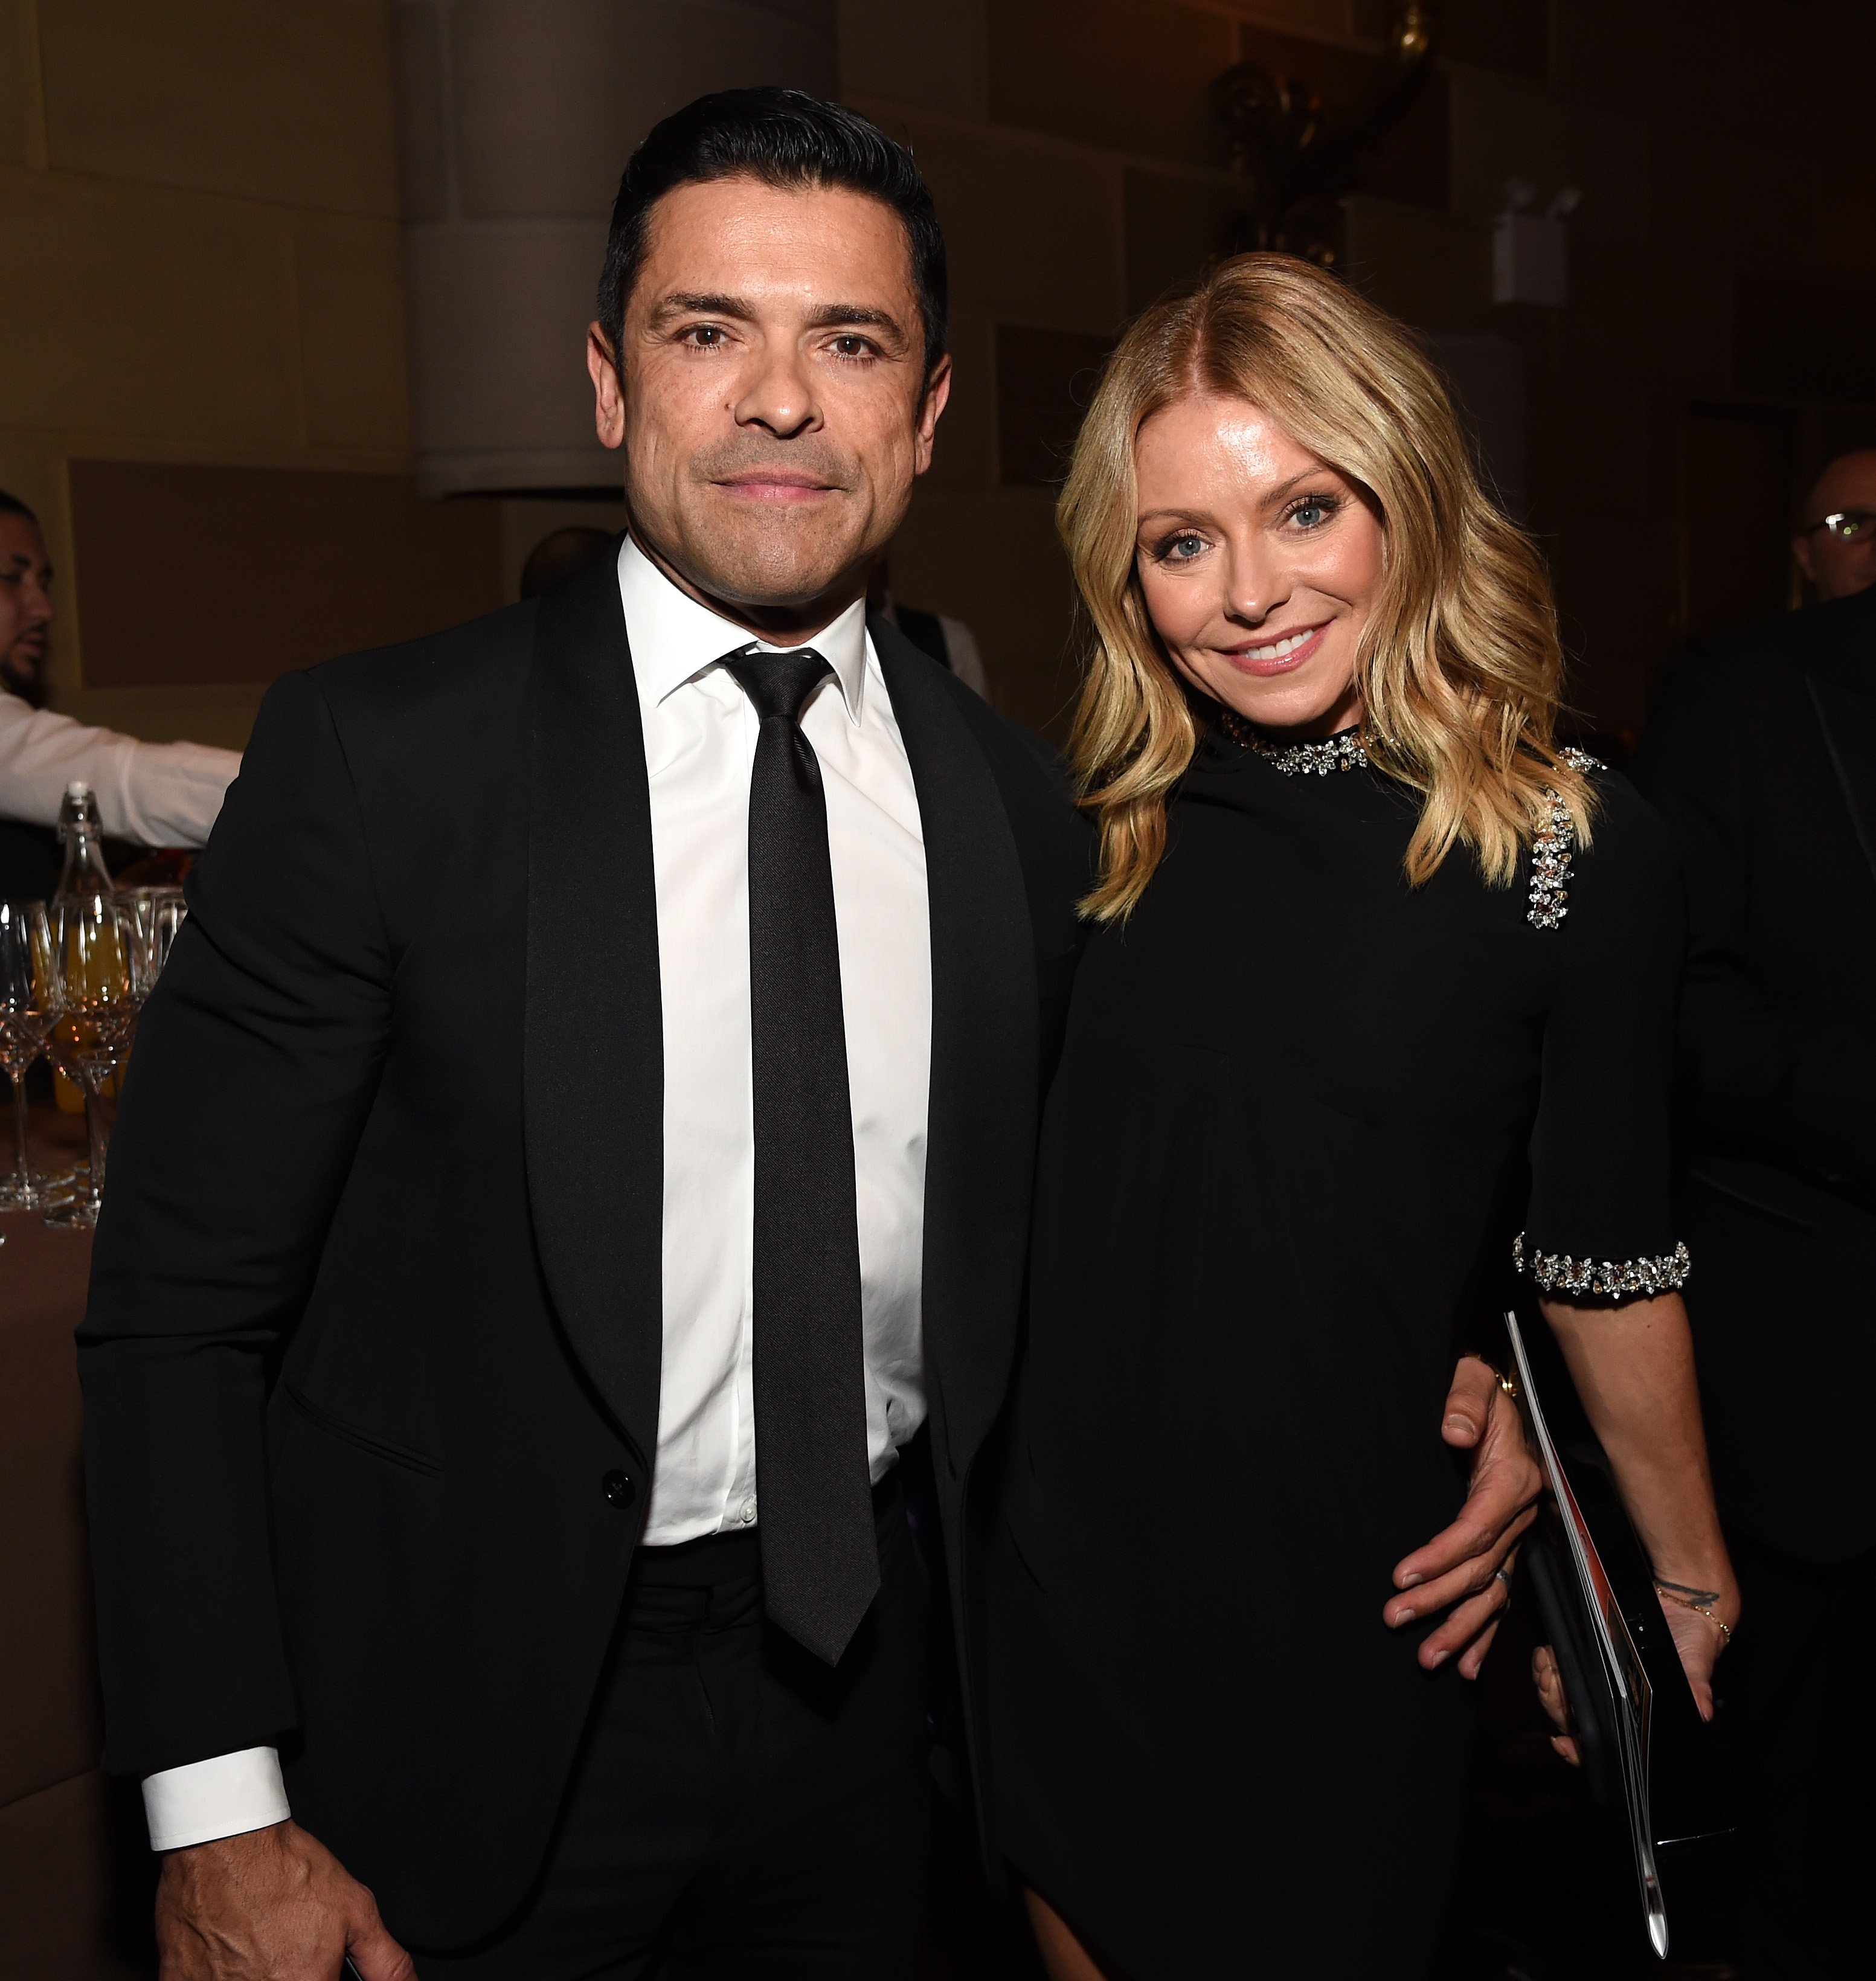 Mark Consuelos and Kelly Ripa pose during the Radio Hall of Fame Class of 2019 Induction Ceremony at Gotham Hall on November 08, 2019. | Photo: Getty Images.